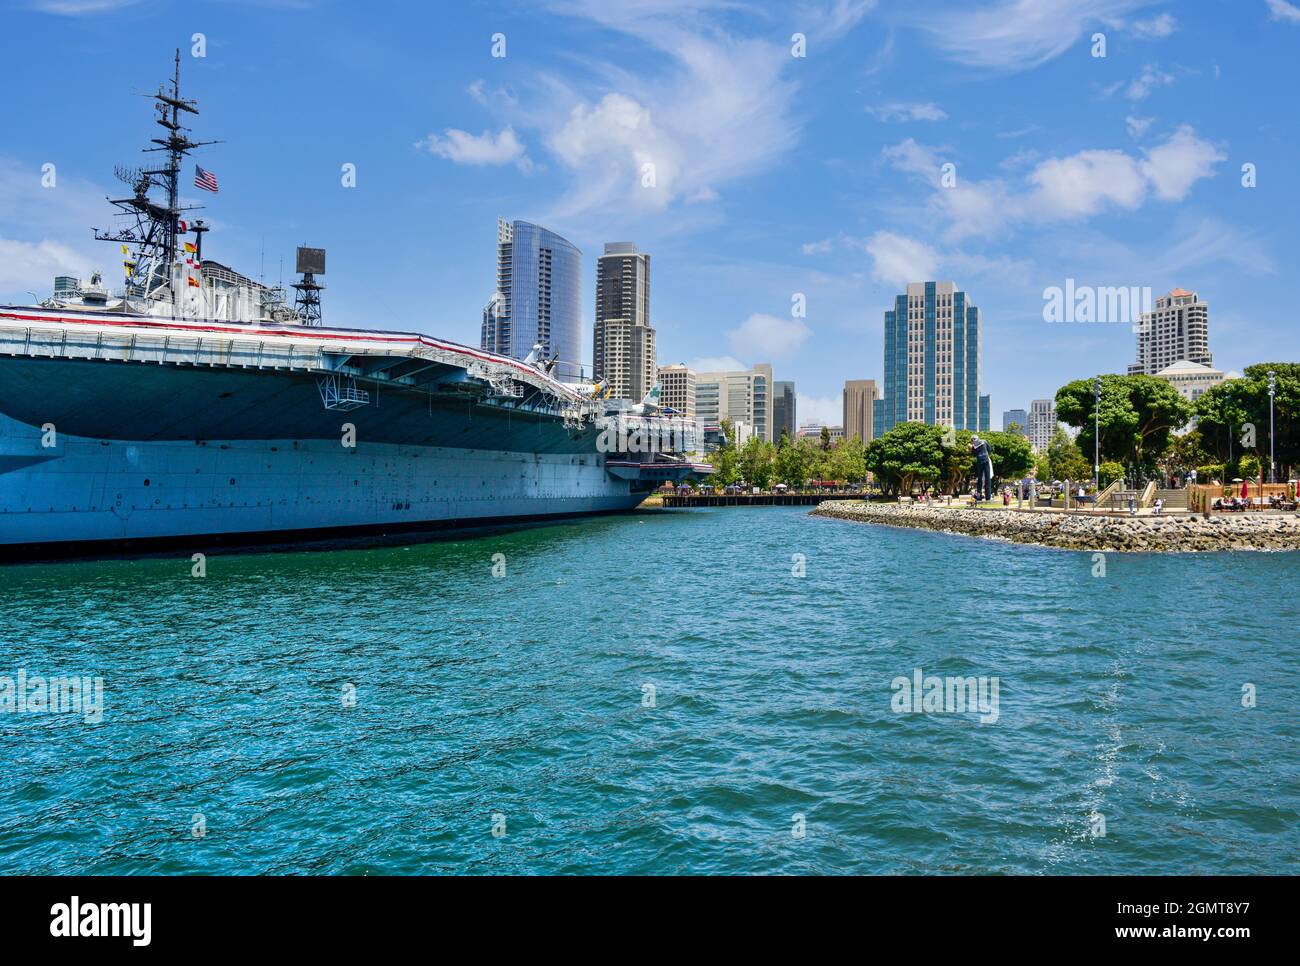 The historical USS Midway aircraft carrier, now retired as a museum at the harbor, with modern San Diego high-rise buildings nearby in San Diego, CA Stock Photo